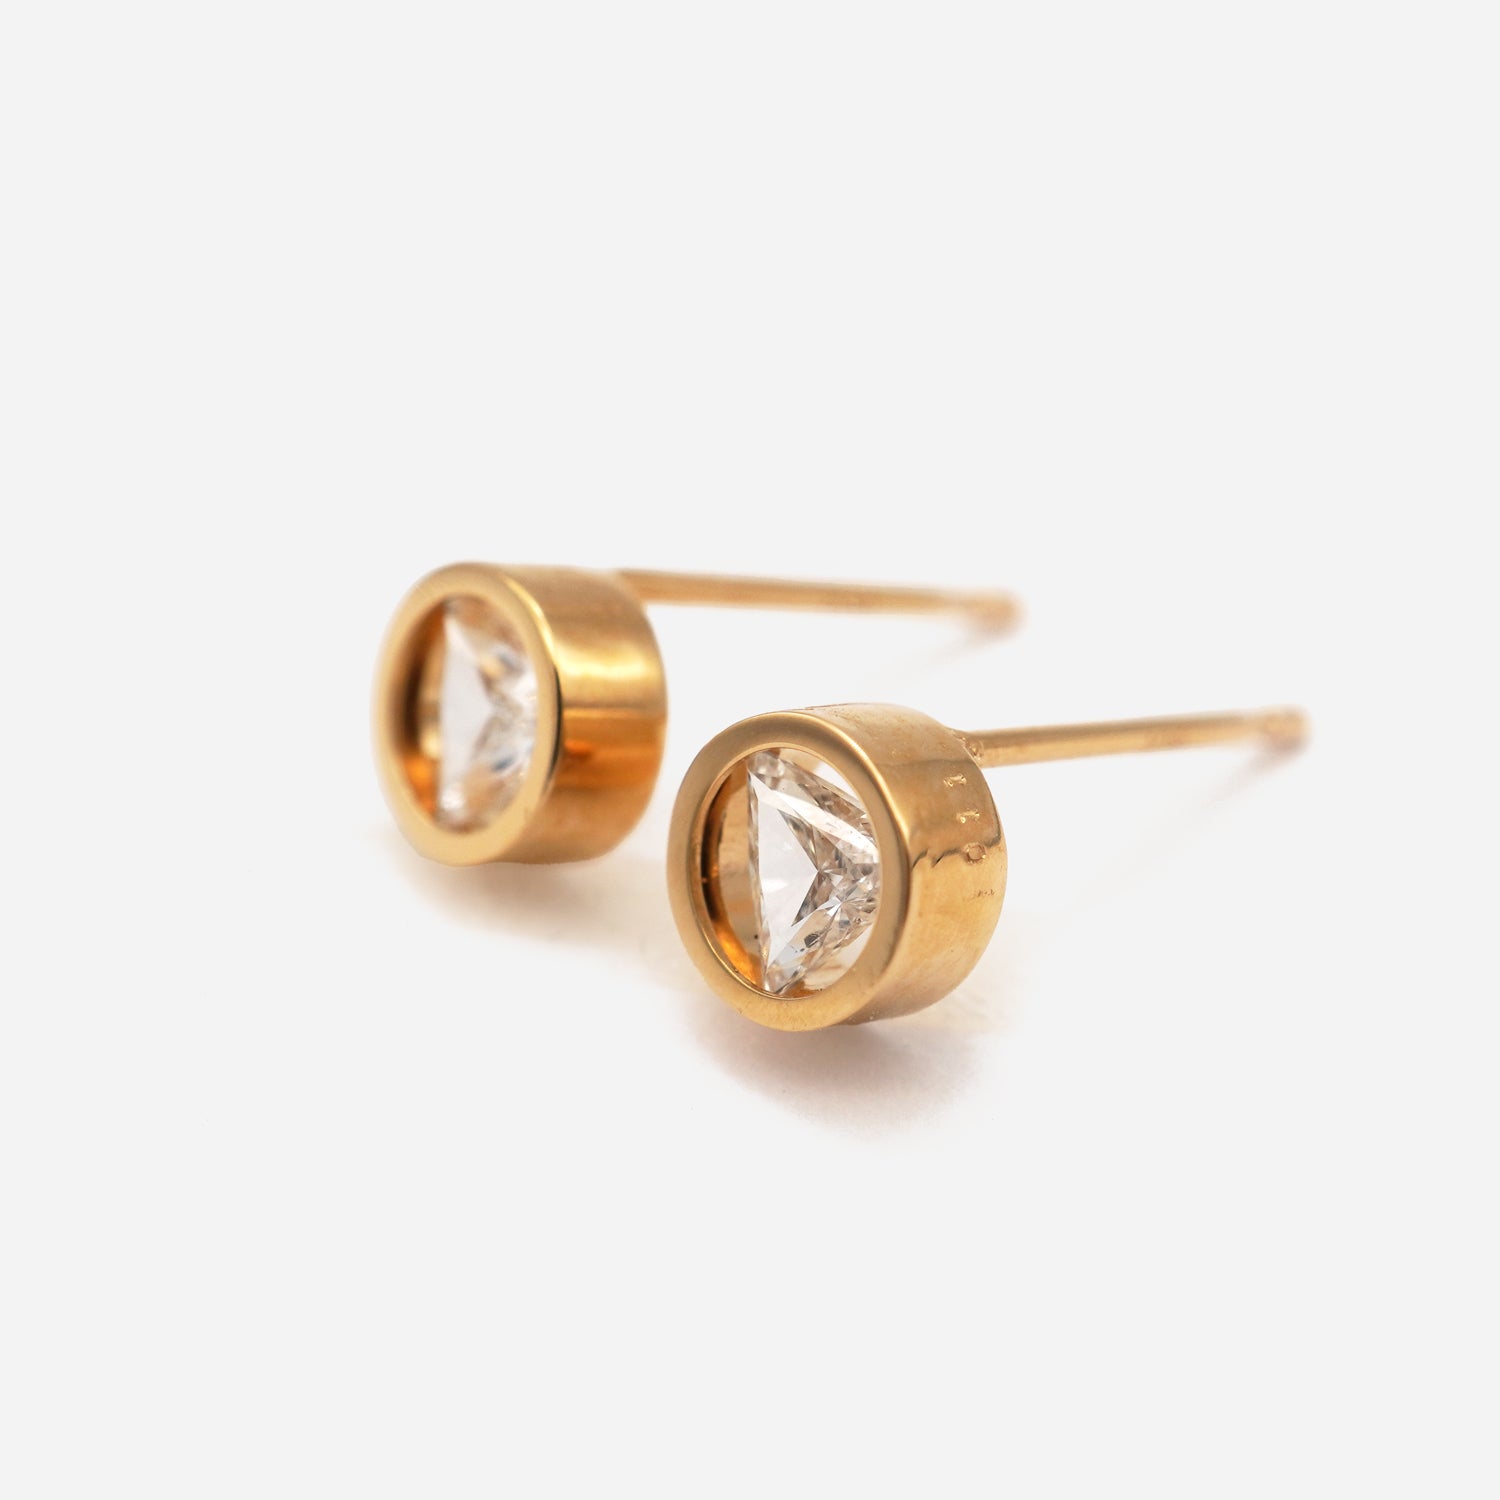 POSITION EARRING 0.22ct #3208